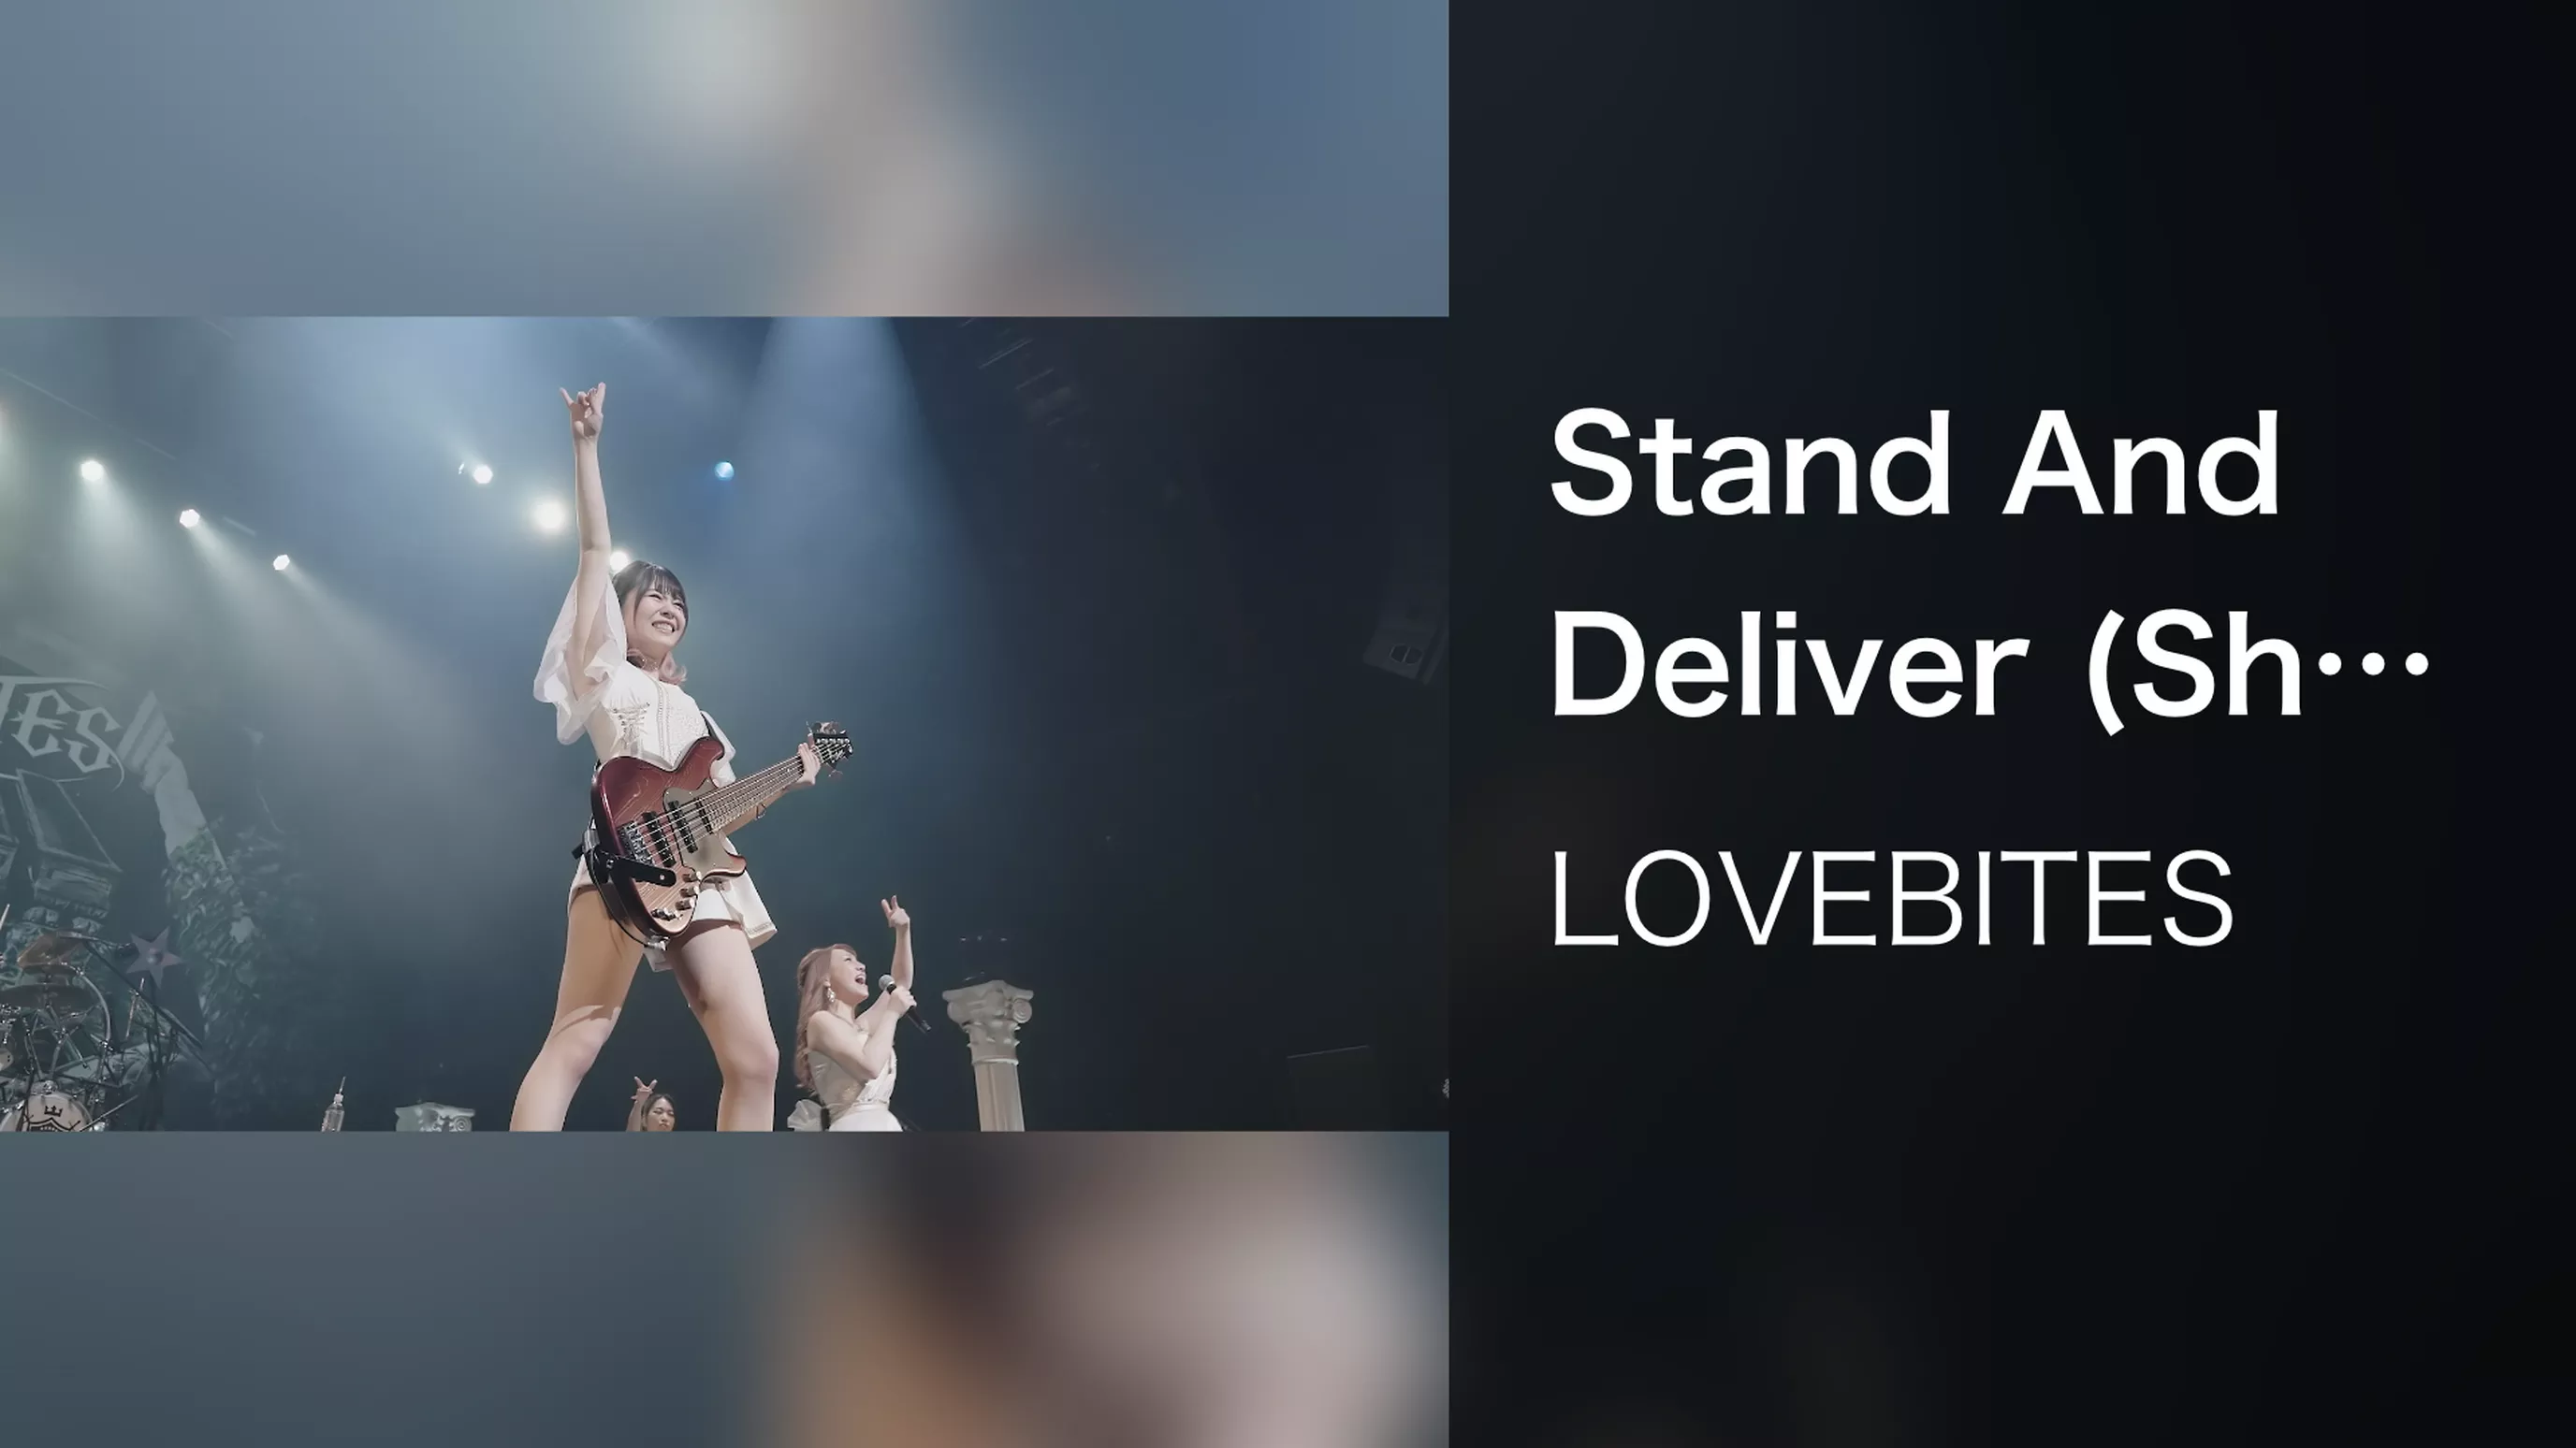 Stand And Deliver (Shoot 'em Down) (Live at EX Theater Roppongi, March 12, 2023)